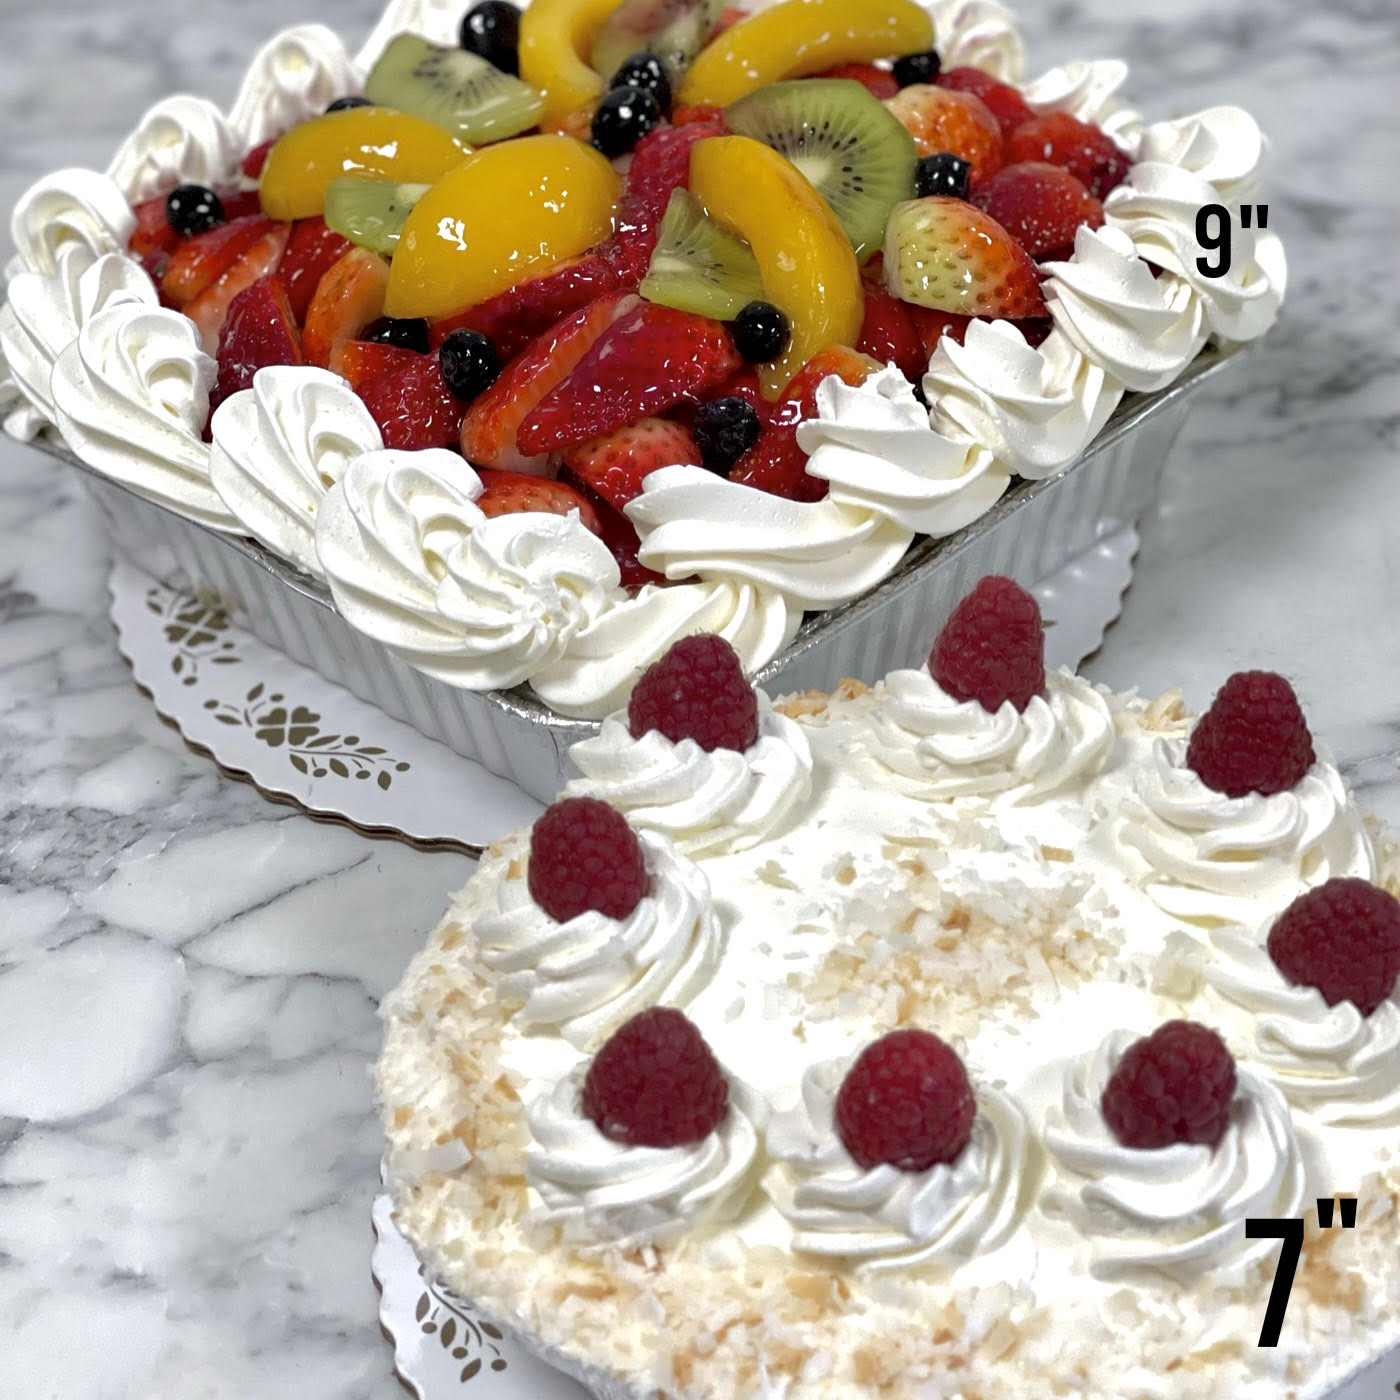 Easy Tres Leches Cake Recipe - Palate's Desire